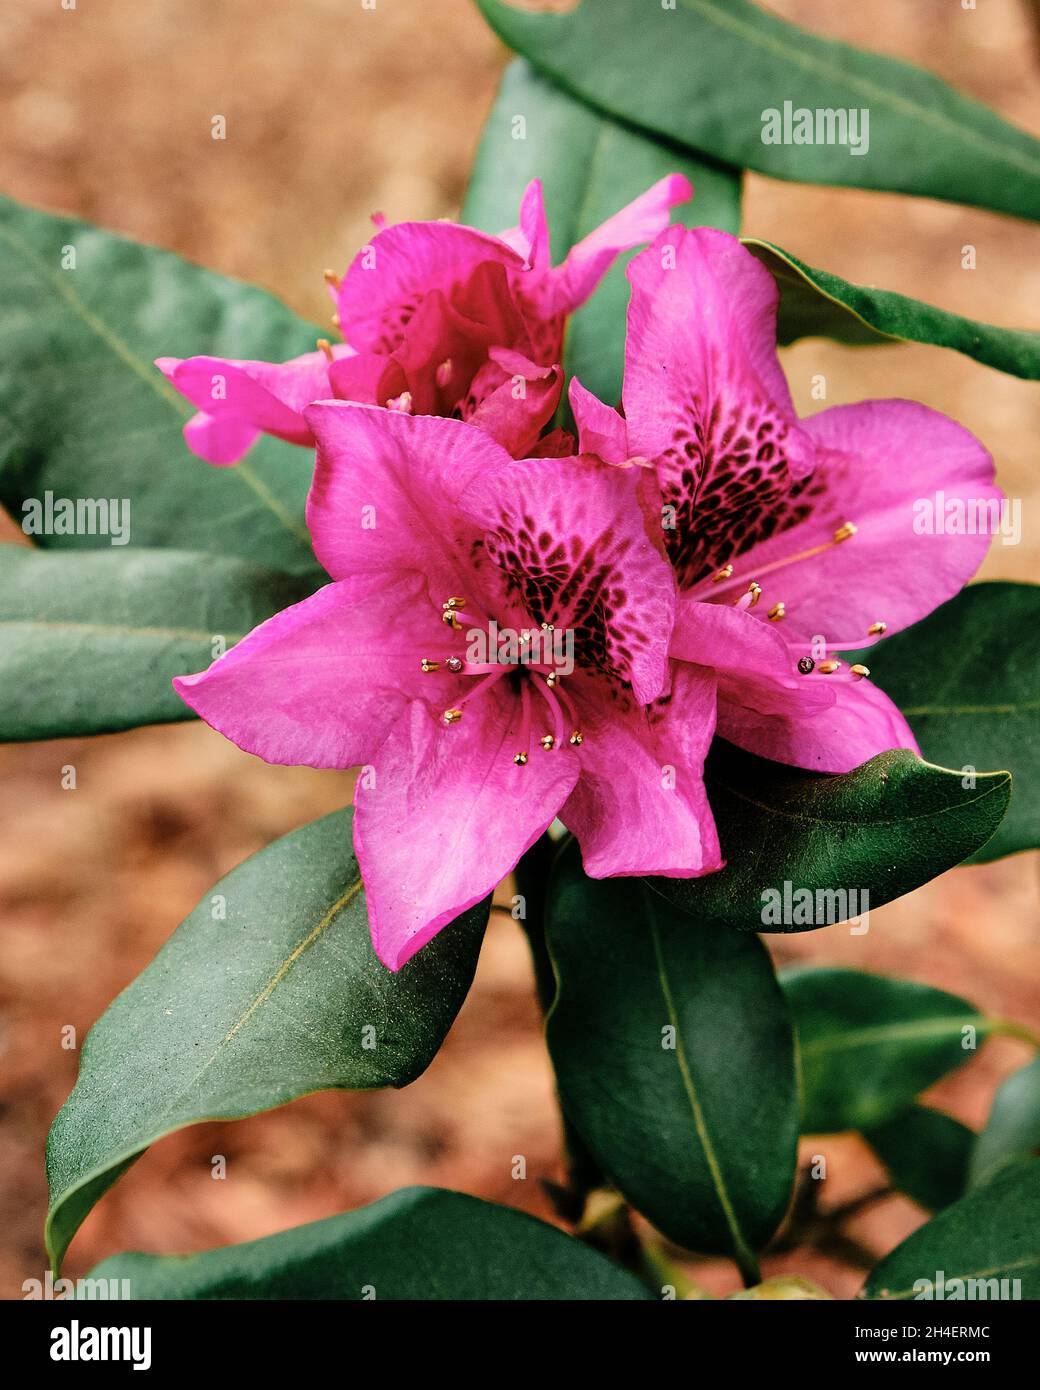 Rhododendron, Nova zembla, dark red, blooming flower and plant in a home garden. Stock Photo